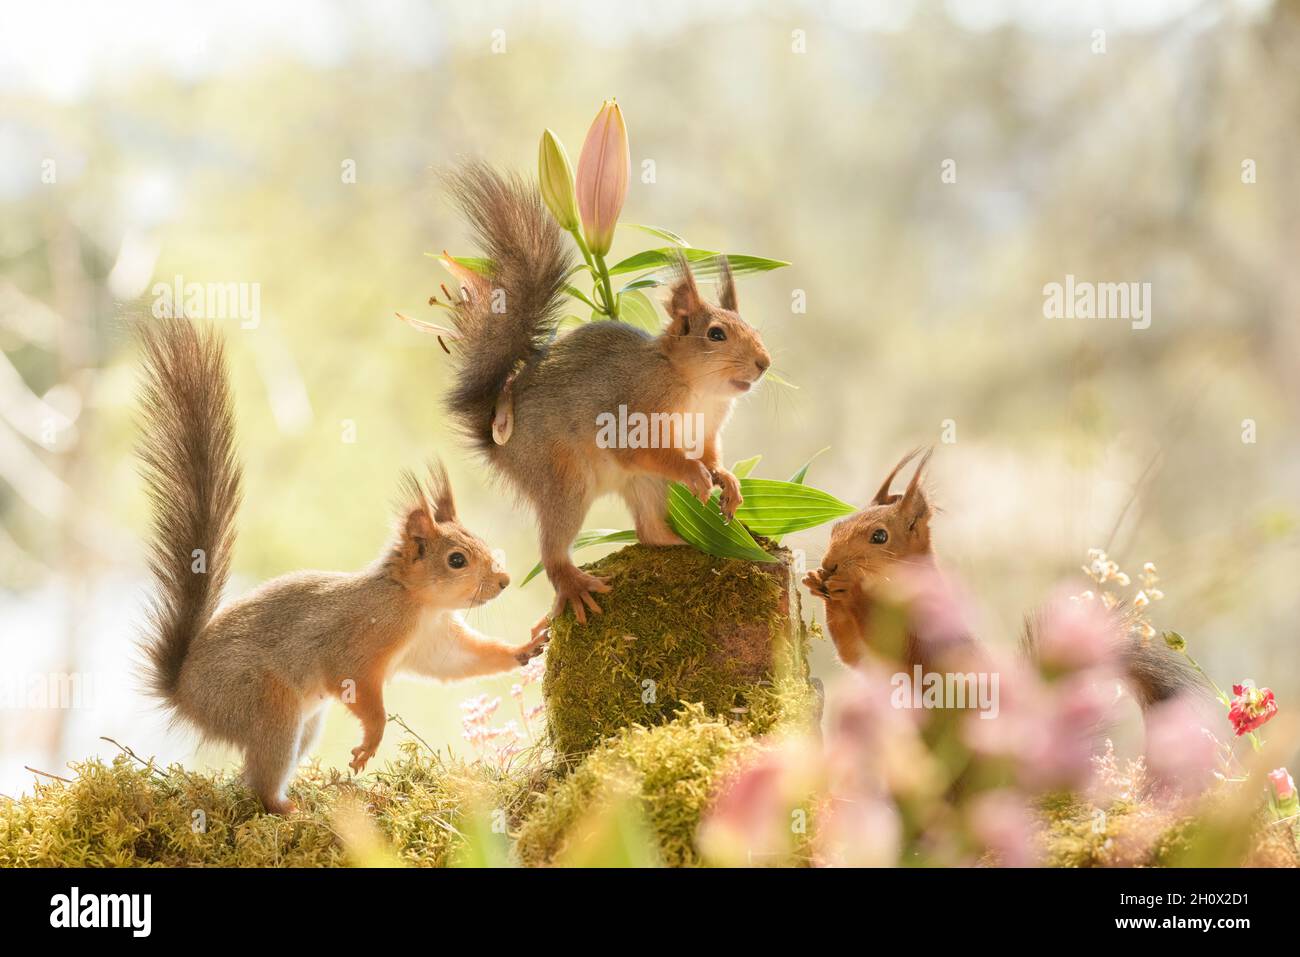 red squirrels are standing between lily flowers Stock Photo